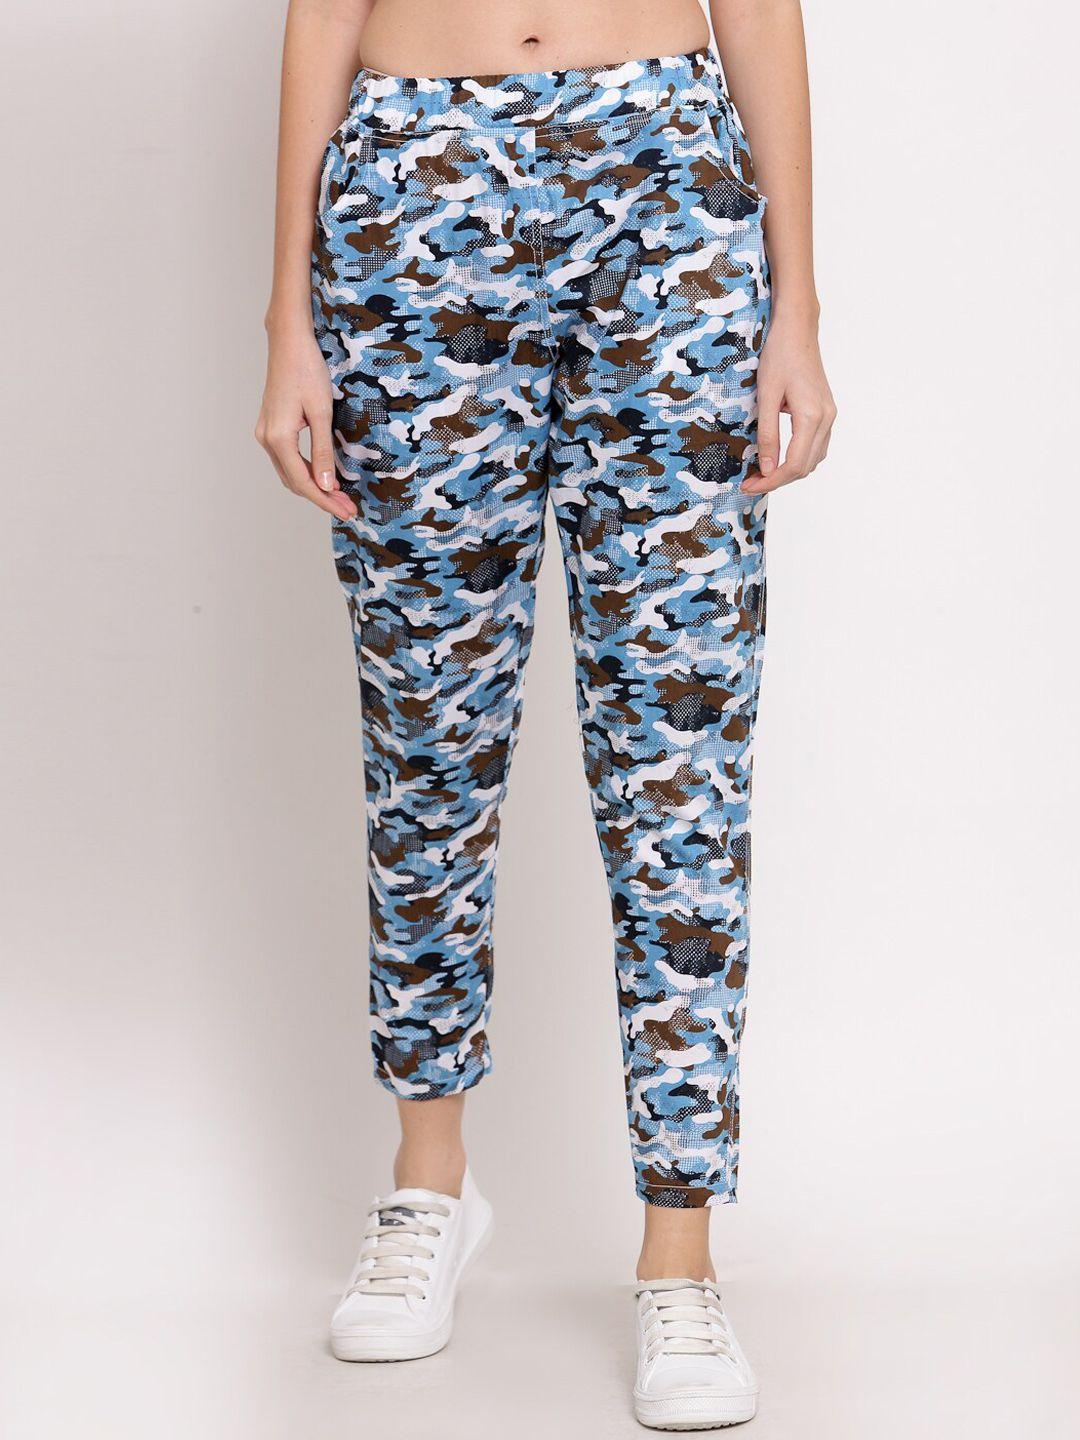 klotthe women camouflage-printed cotton track pant